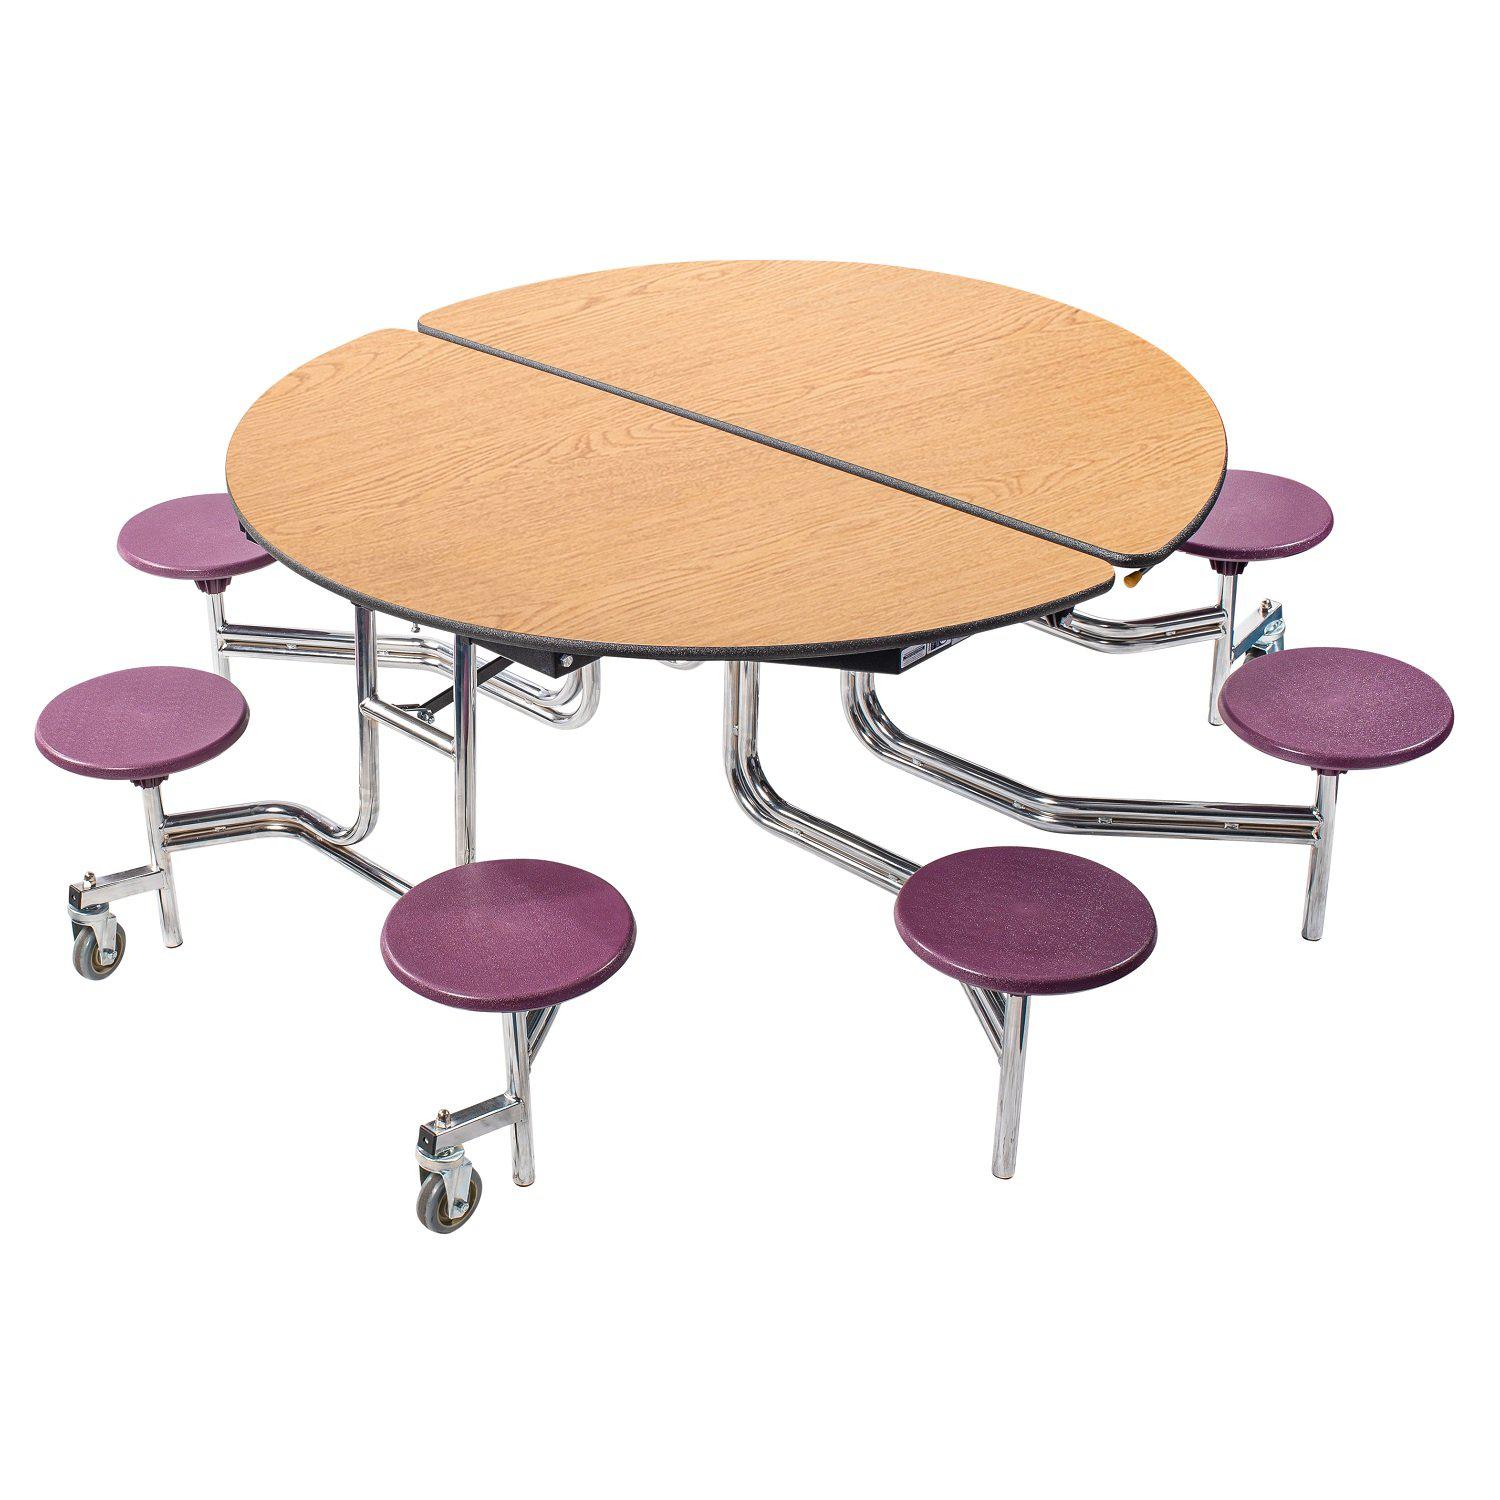 Mobile Cafeteria Table with 8 Stools, 60" Round, Plywood Core, Vinyl T-Mold Edge, Chrome Frame